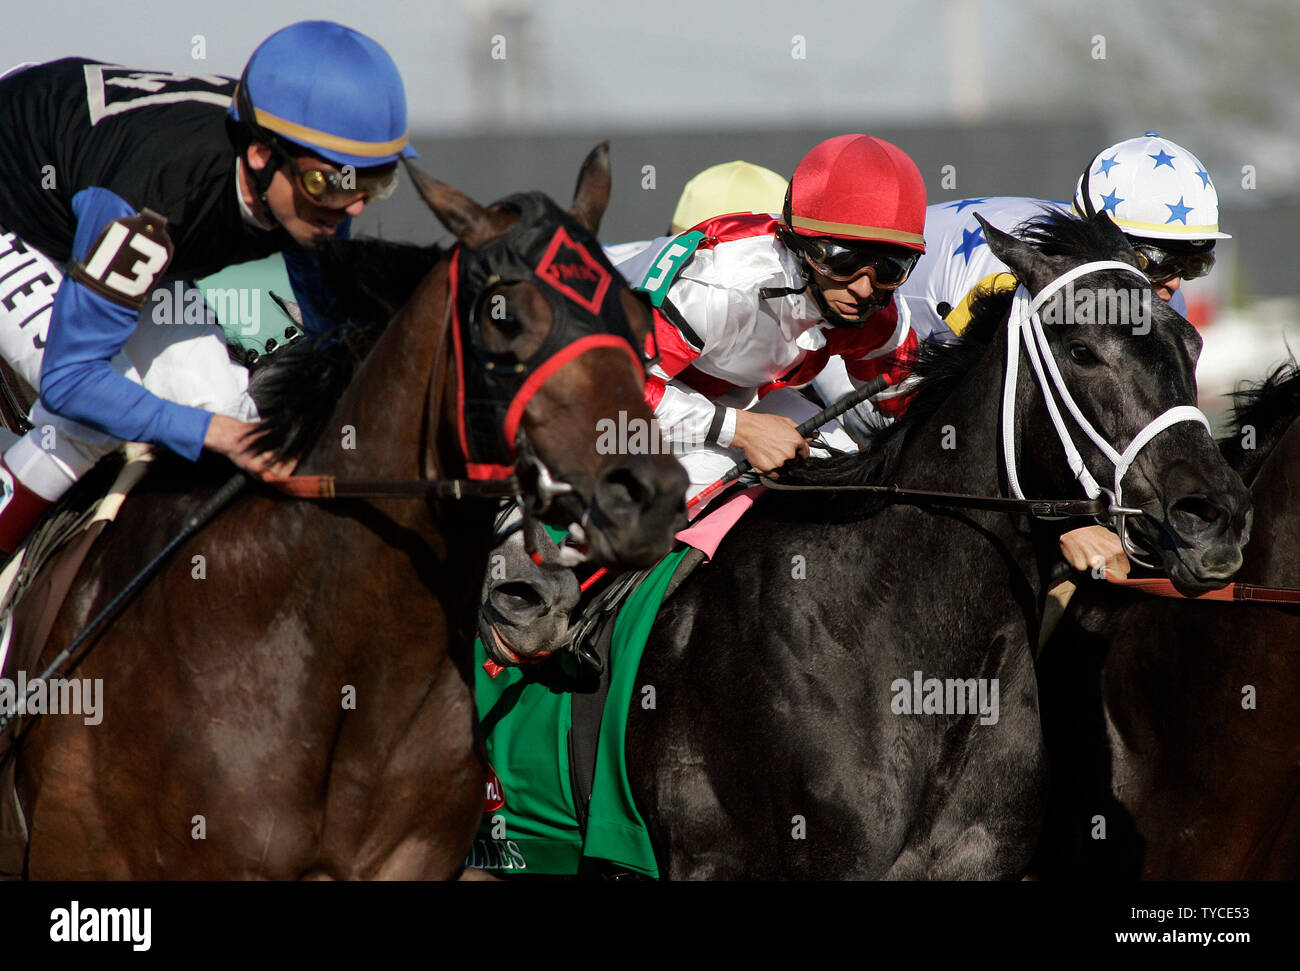 Gabriel Saez (R) aboard Eight Belles, leads Bob Black Jack, with Richard Migliore up (L) through the main stretch at the start of the 134th running of the Kentucky Derby at Churchill Downs on May 3, 2008 in Louisville, Kentucky. Philly Eight Belles, who finished second, was euthanized on the track due to a fatal injury. (UPI Photo/Frank Polich) Stock Photo